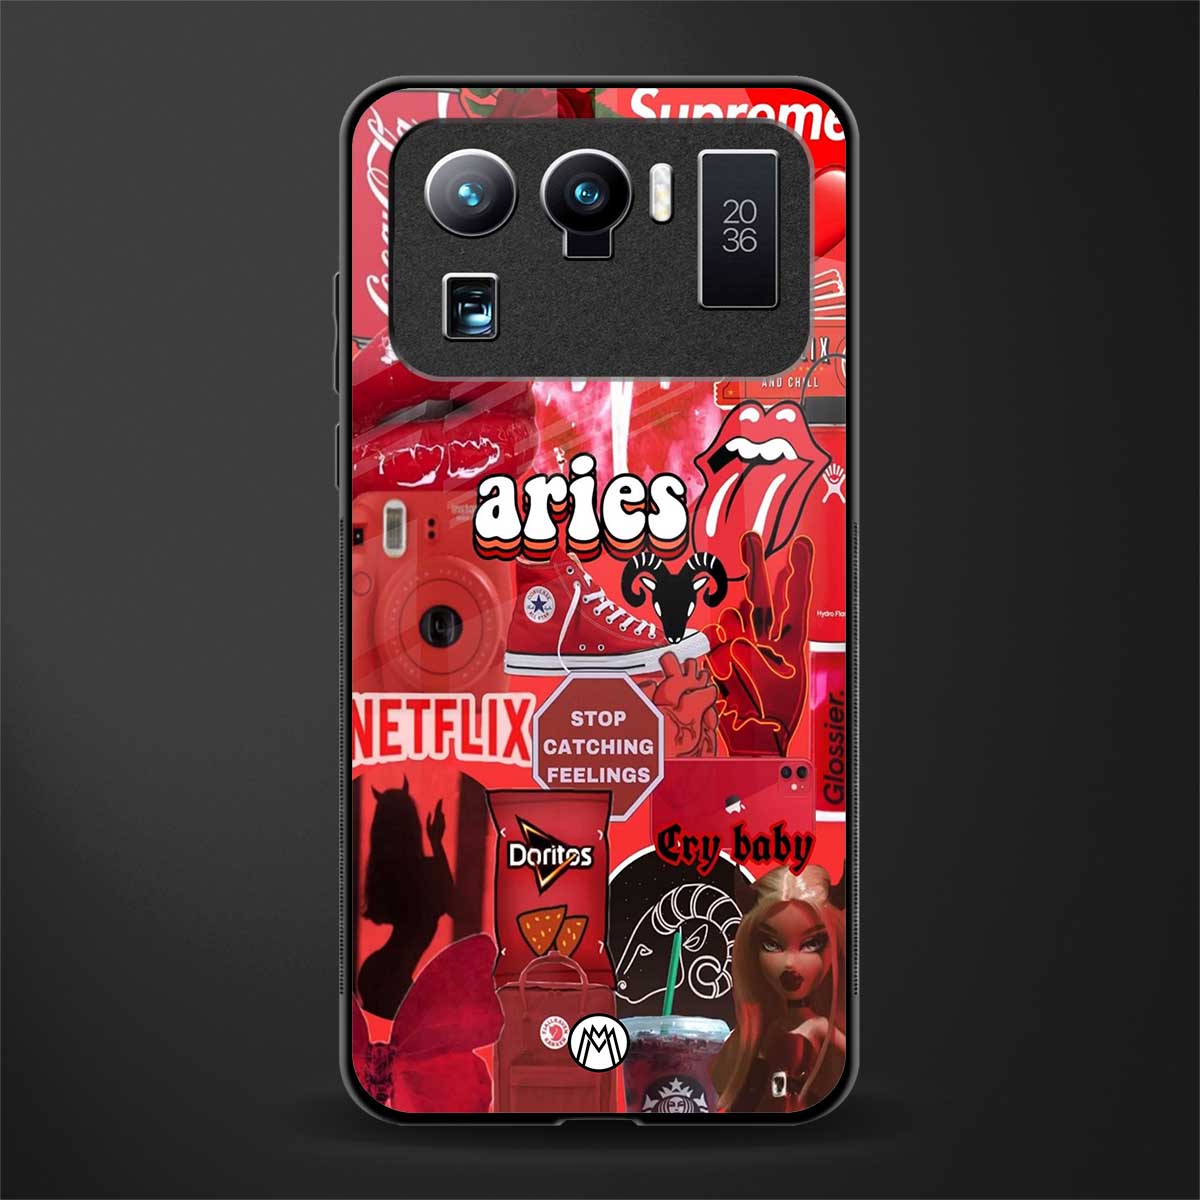 aries aesthetic collage glass case for mi 11 ultra 5g image